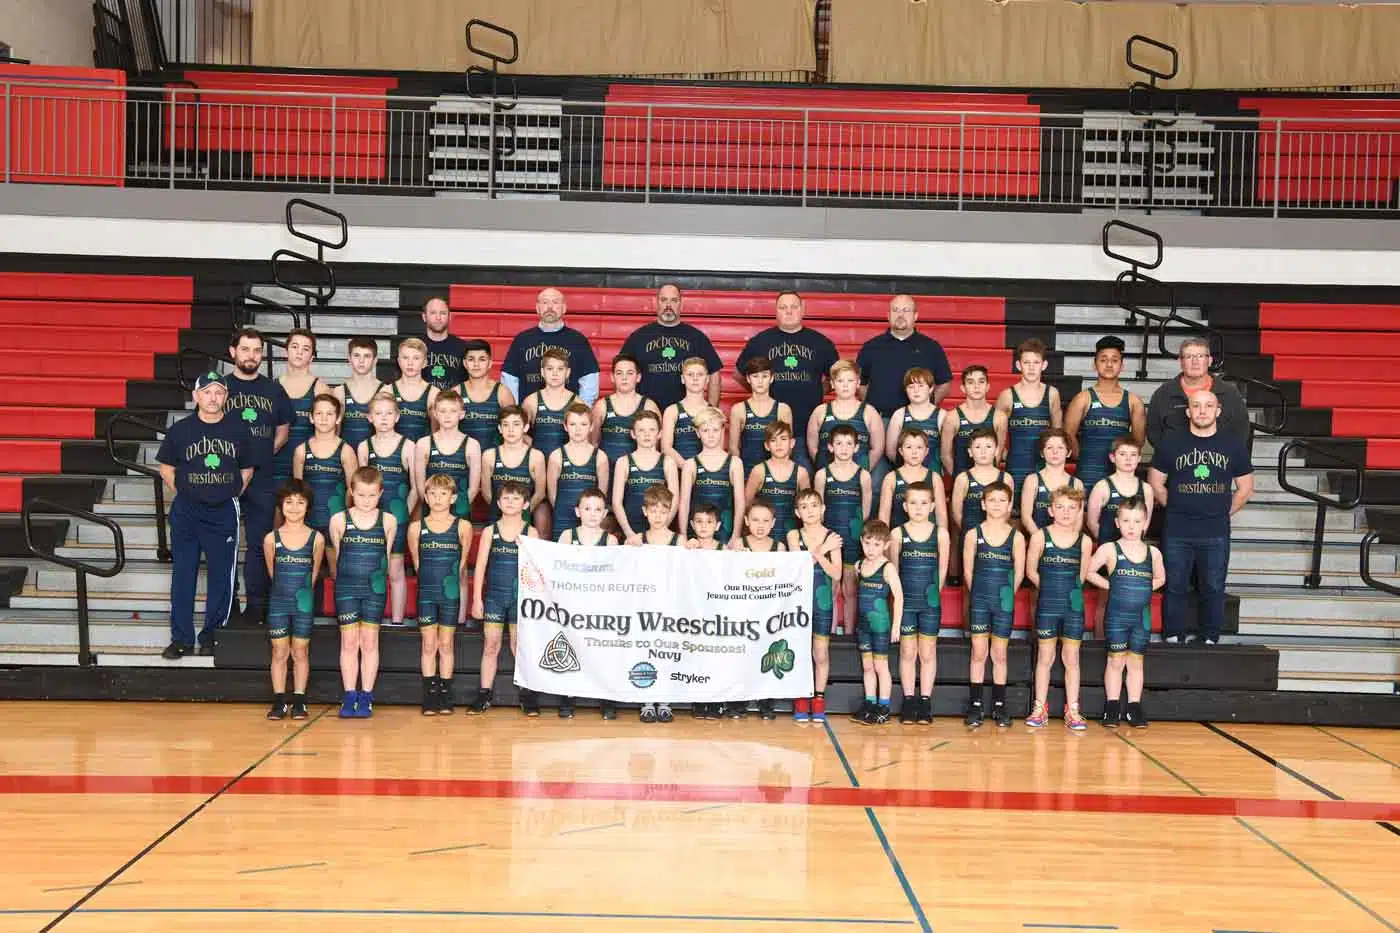 McHenry Wrestling Club group photo